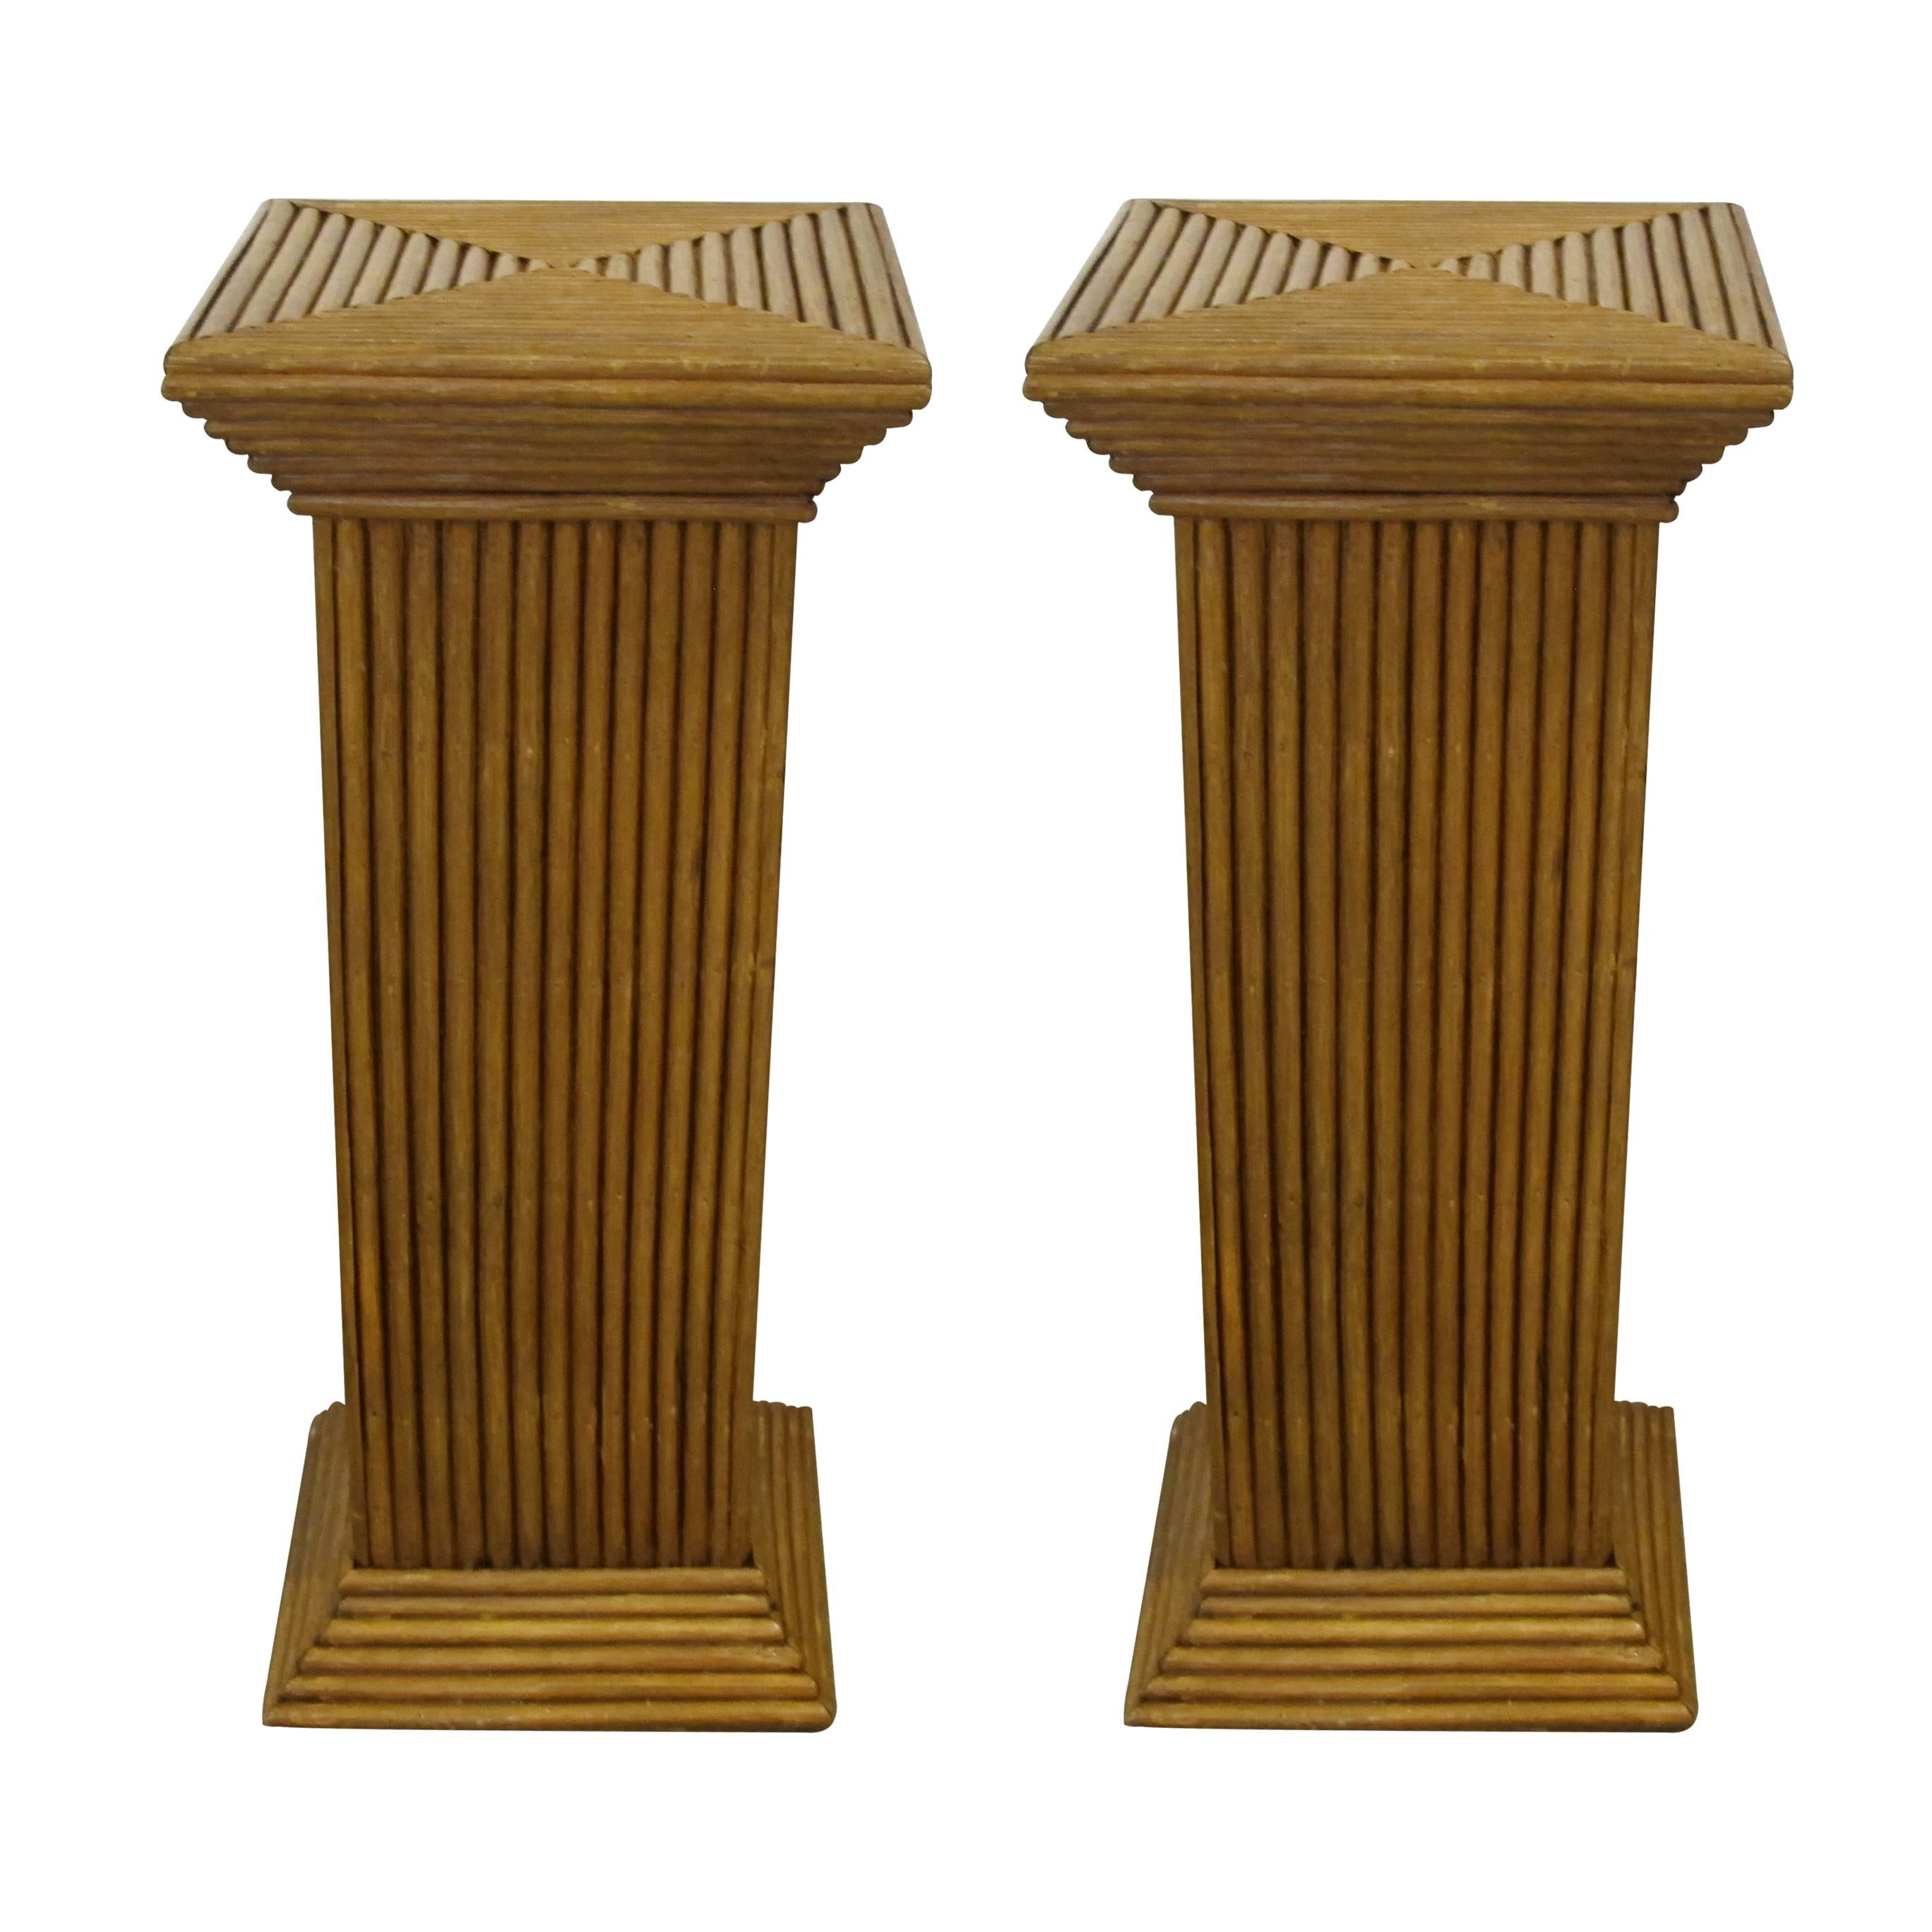 Pair of 1950s French mid century handcrafted pedestals, columns or plant stands. The pedestals are rectangular with a very well-crafted geometric design. They are very sturdy which makes them ideal to display pieces of art, sculptures or plants.